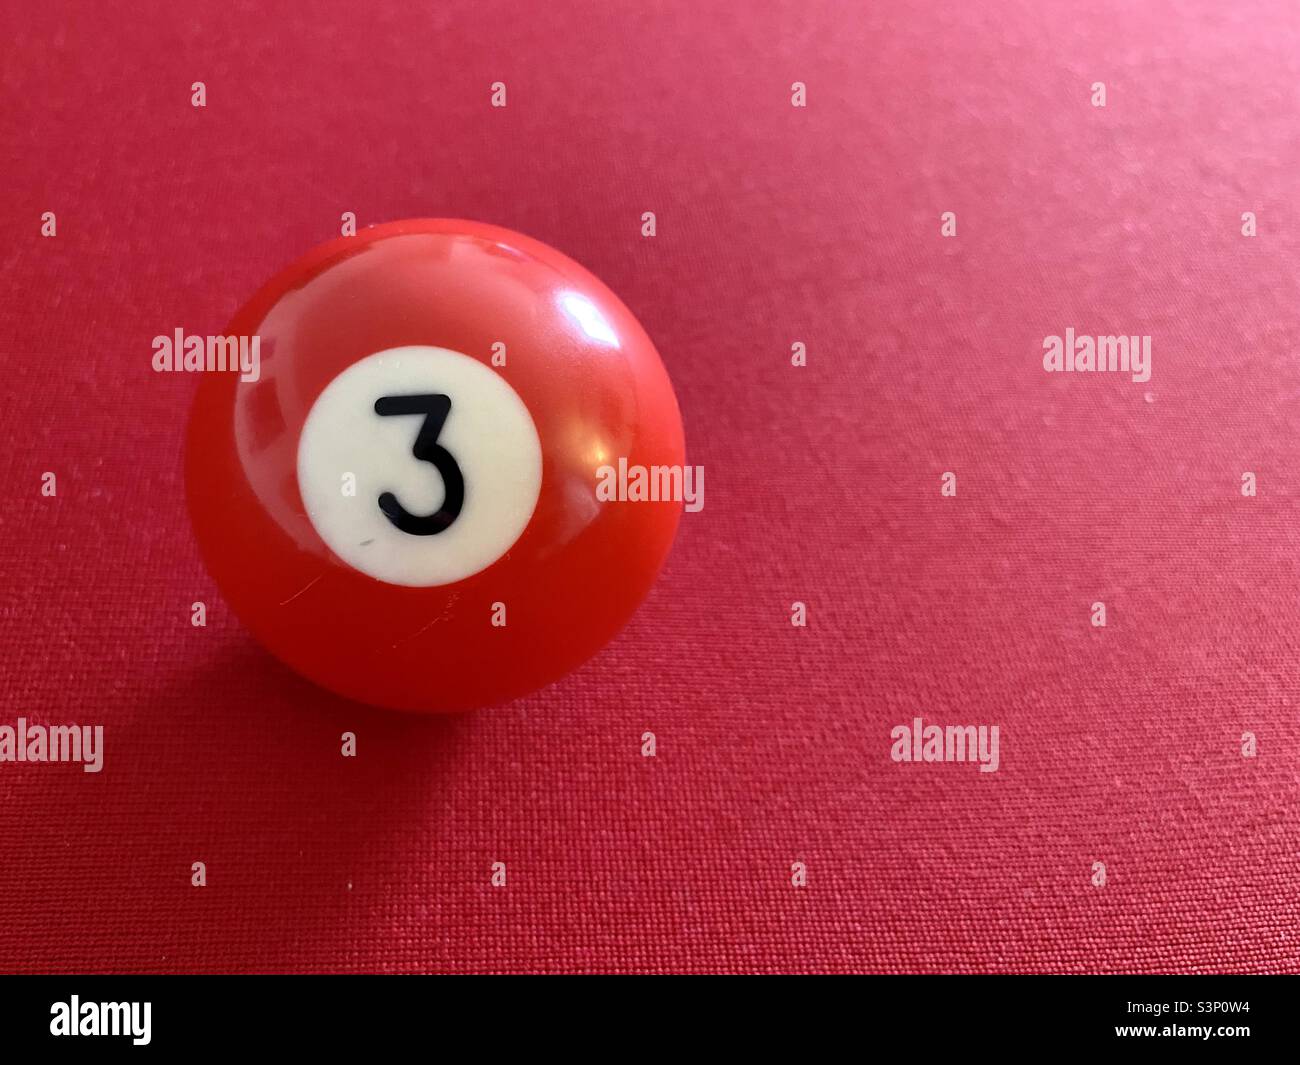 Red pool ball on red baize background Stock Photo